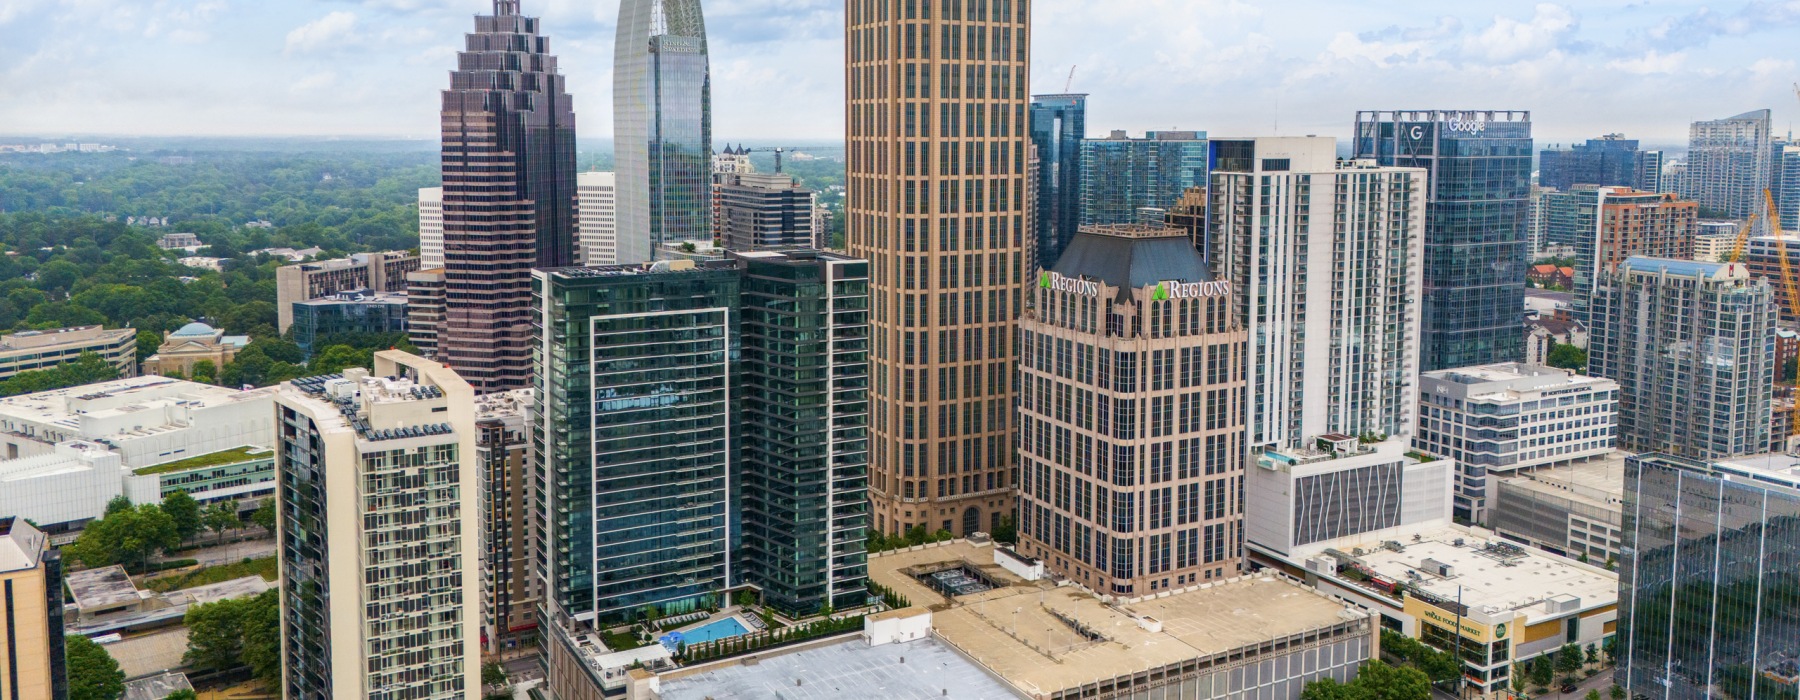 Skyline of downtown Atlanta with Hanover Midtown in the forefront 